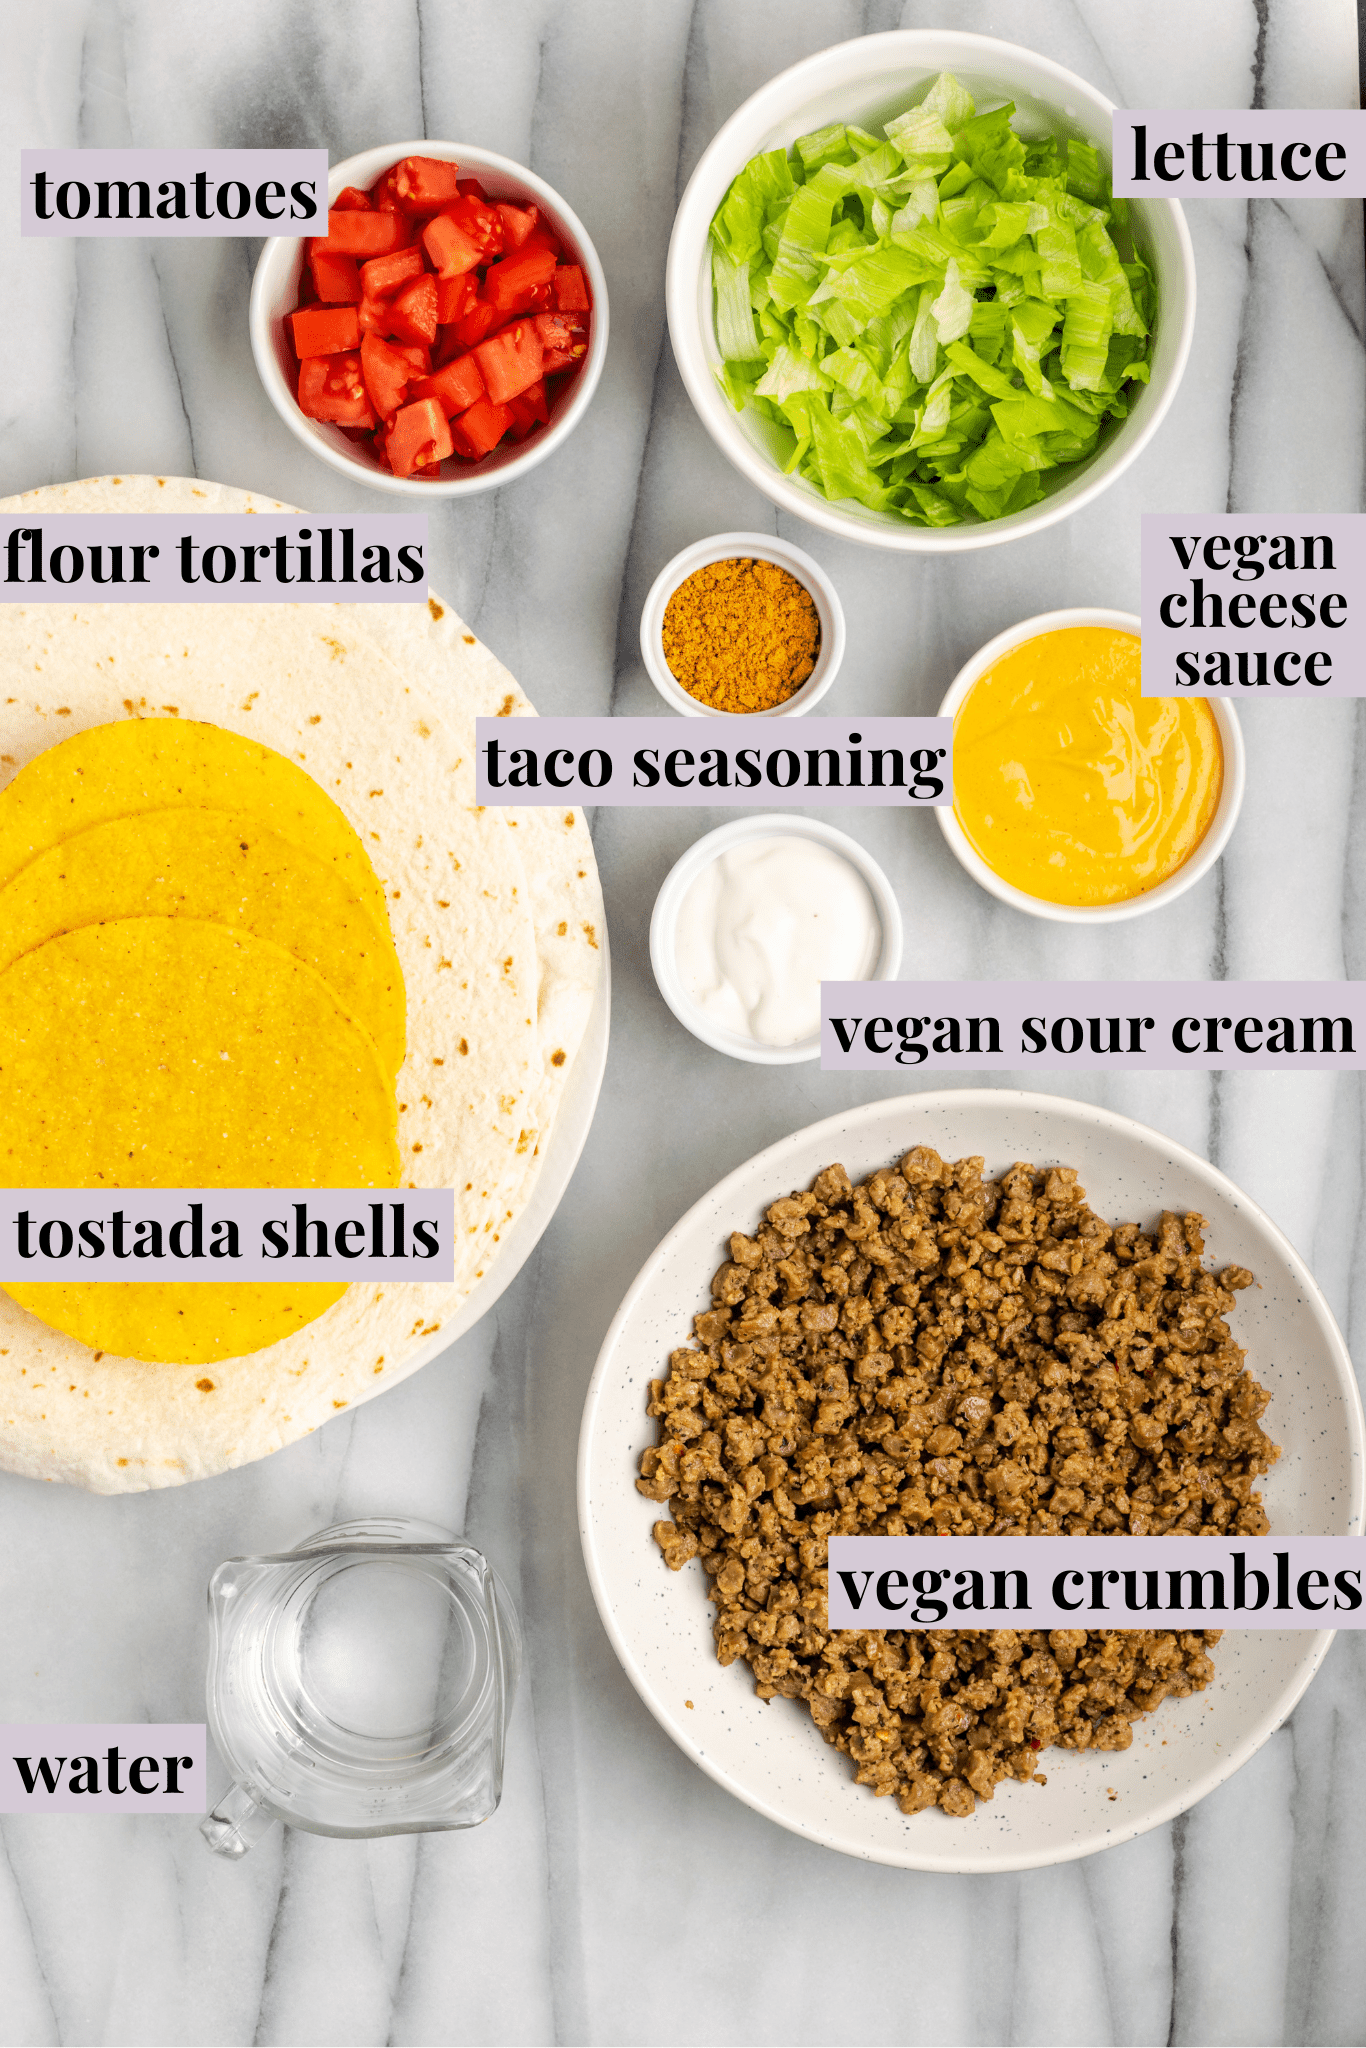 Overhead view of the ingredients for vegan crunchwrap supremes: flour tortillas, tostadas, a bowl of vegan meat crumbles, a bowl of lettuce, a bowl of tomatoes, a bowl of taco seasoning, a bowl of vegan sour cream, a bowl of vegan cheese sauce, and a glass of water